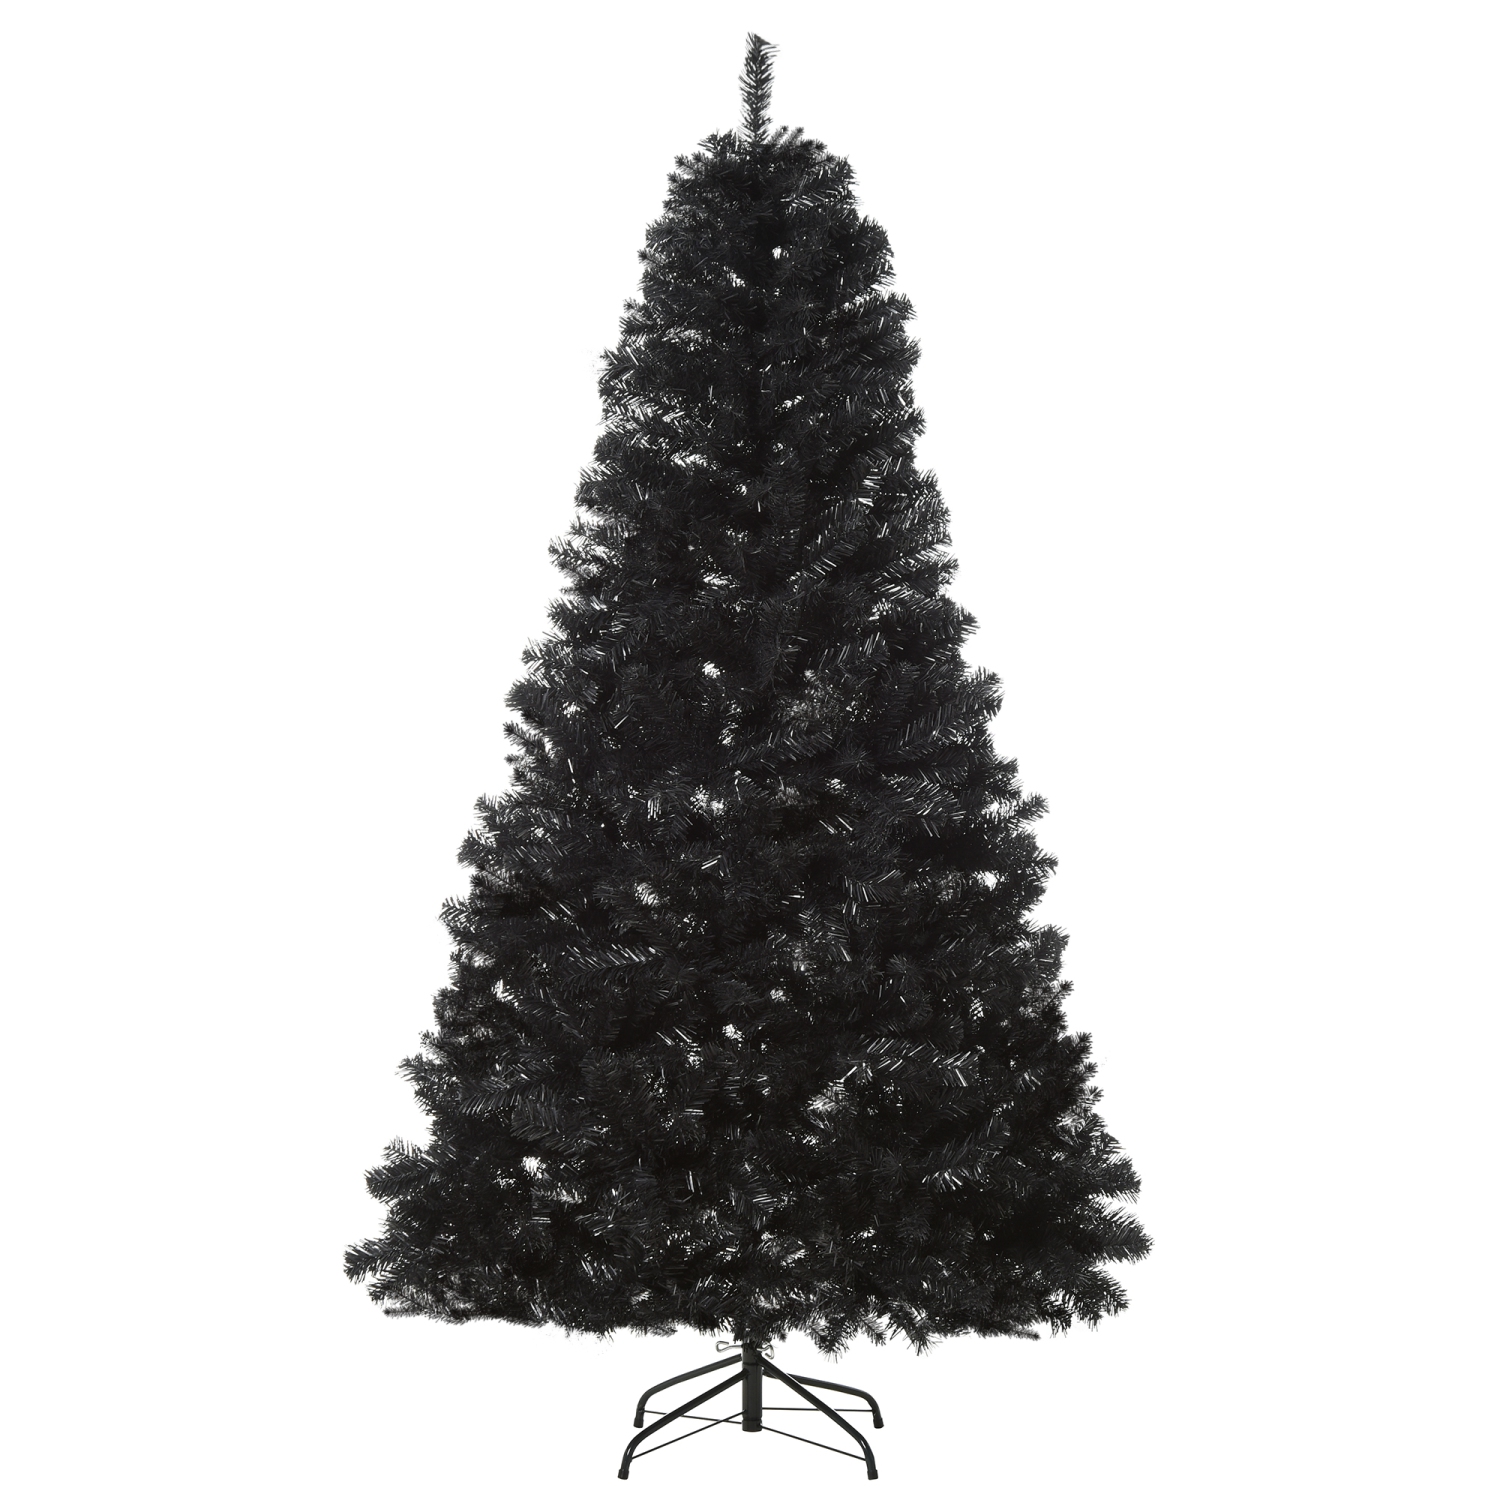 HOMCOM 7ft Artificial Christmas Tree Unlit Douglas Fir with Realistic Branch Tips, Black Halloween Style